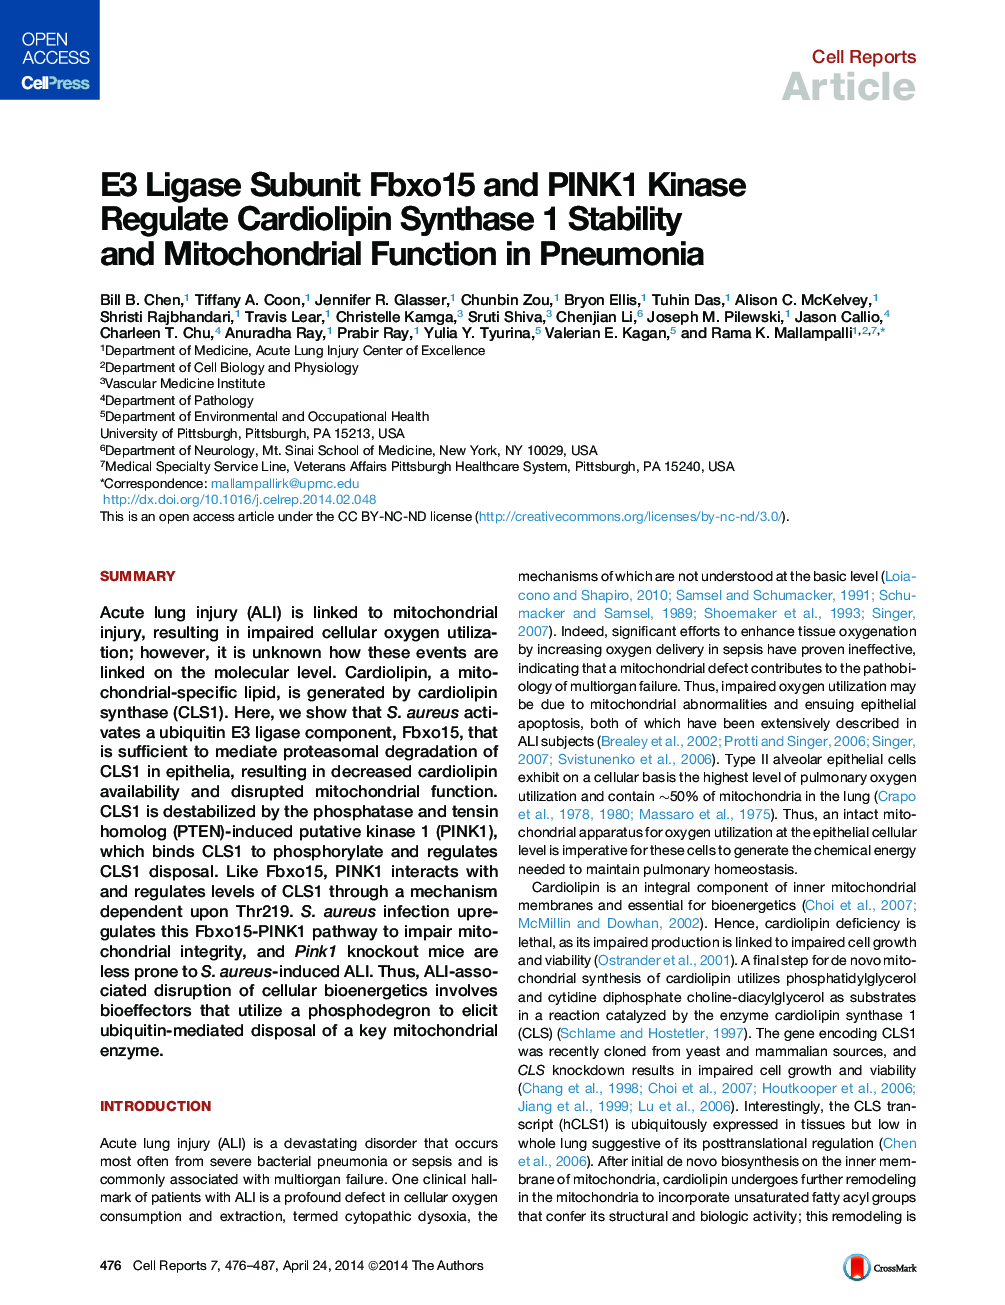 E3 Ligase Subunit Fbxo15 and PINK1 Kinase Regulate Cardiolipin Synthase 1 Stability and Mitochondrial Function in Pneumonia 